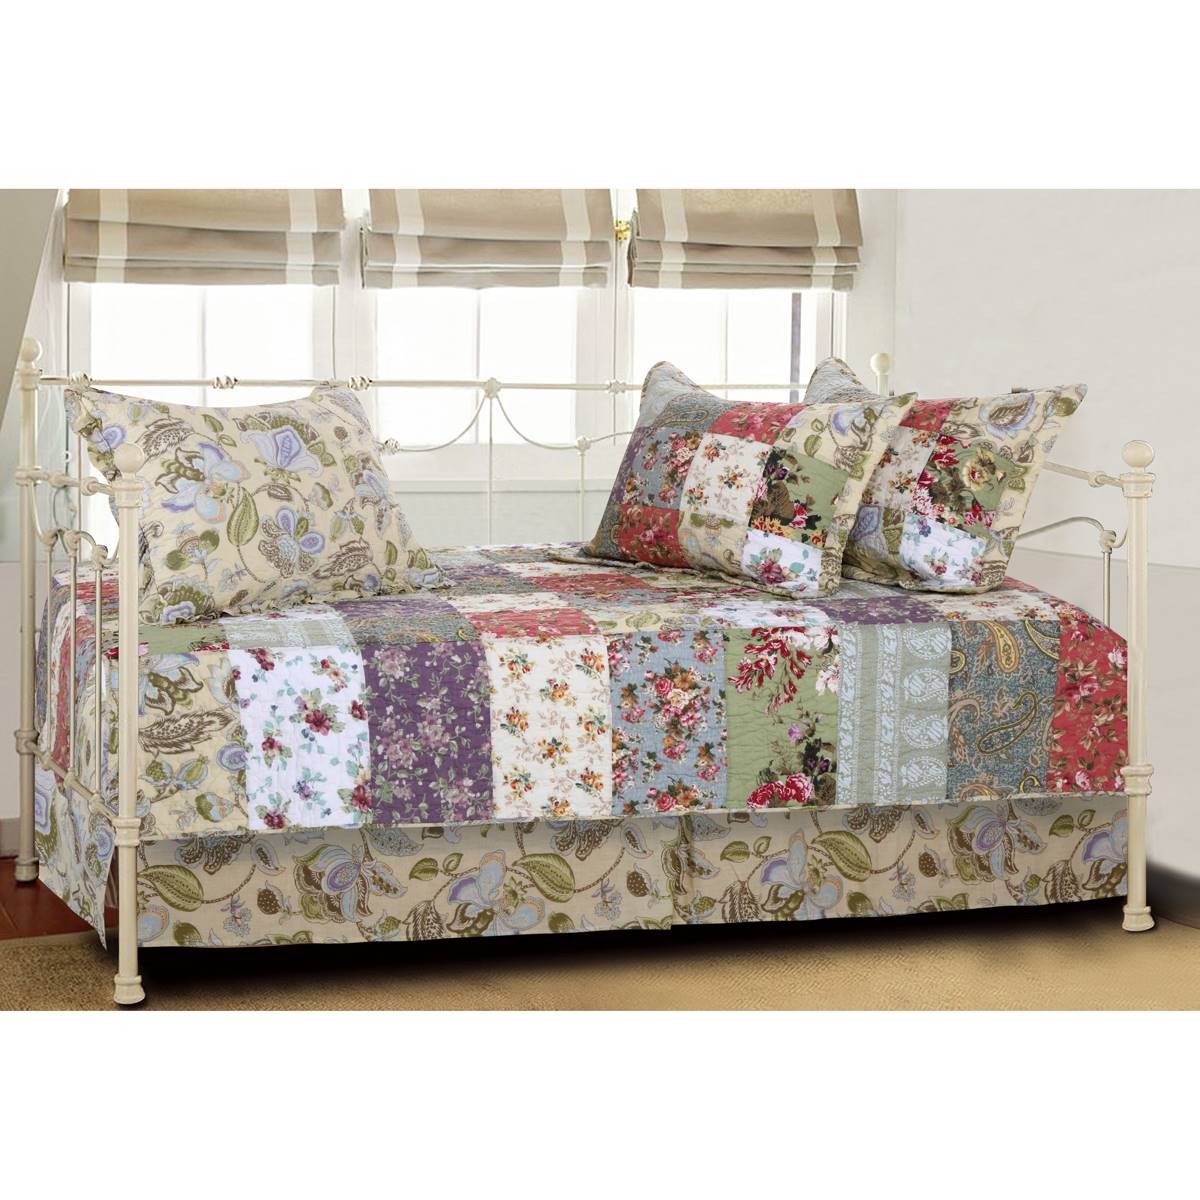 Greenland Home Fashions(tm) Blooming Prairie Patchwork Daybed Set